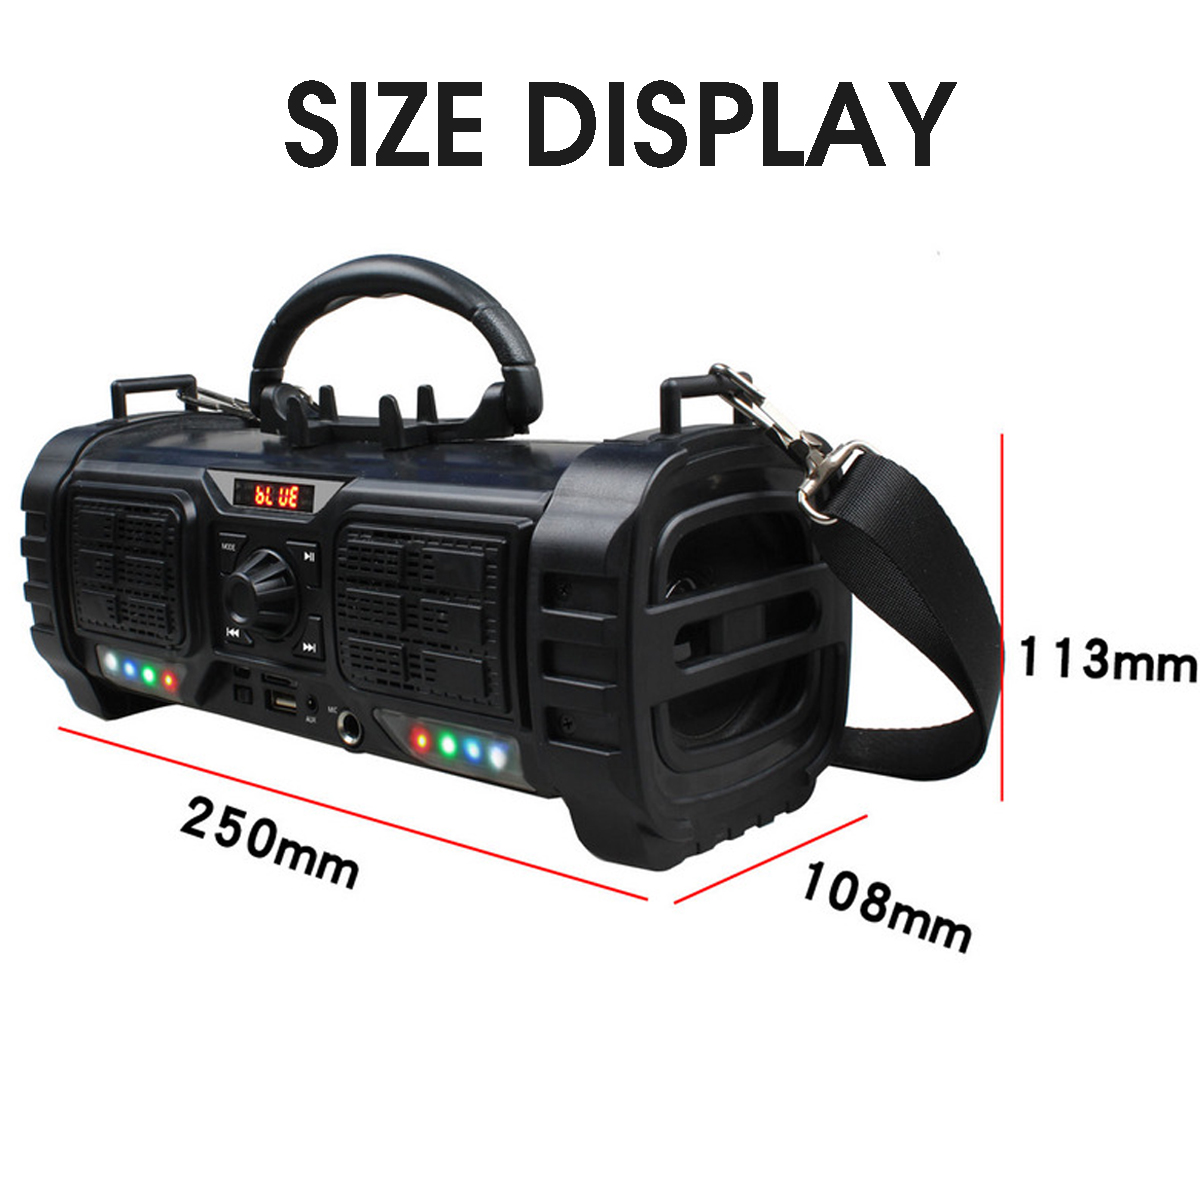 Portable-Wireless-bluetooth-Speaker-LED-Light-Heavy-Bass-2200mAh-TF-Card-Speaker-with-Mic-with-Phone-1503608-8